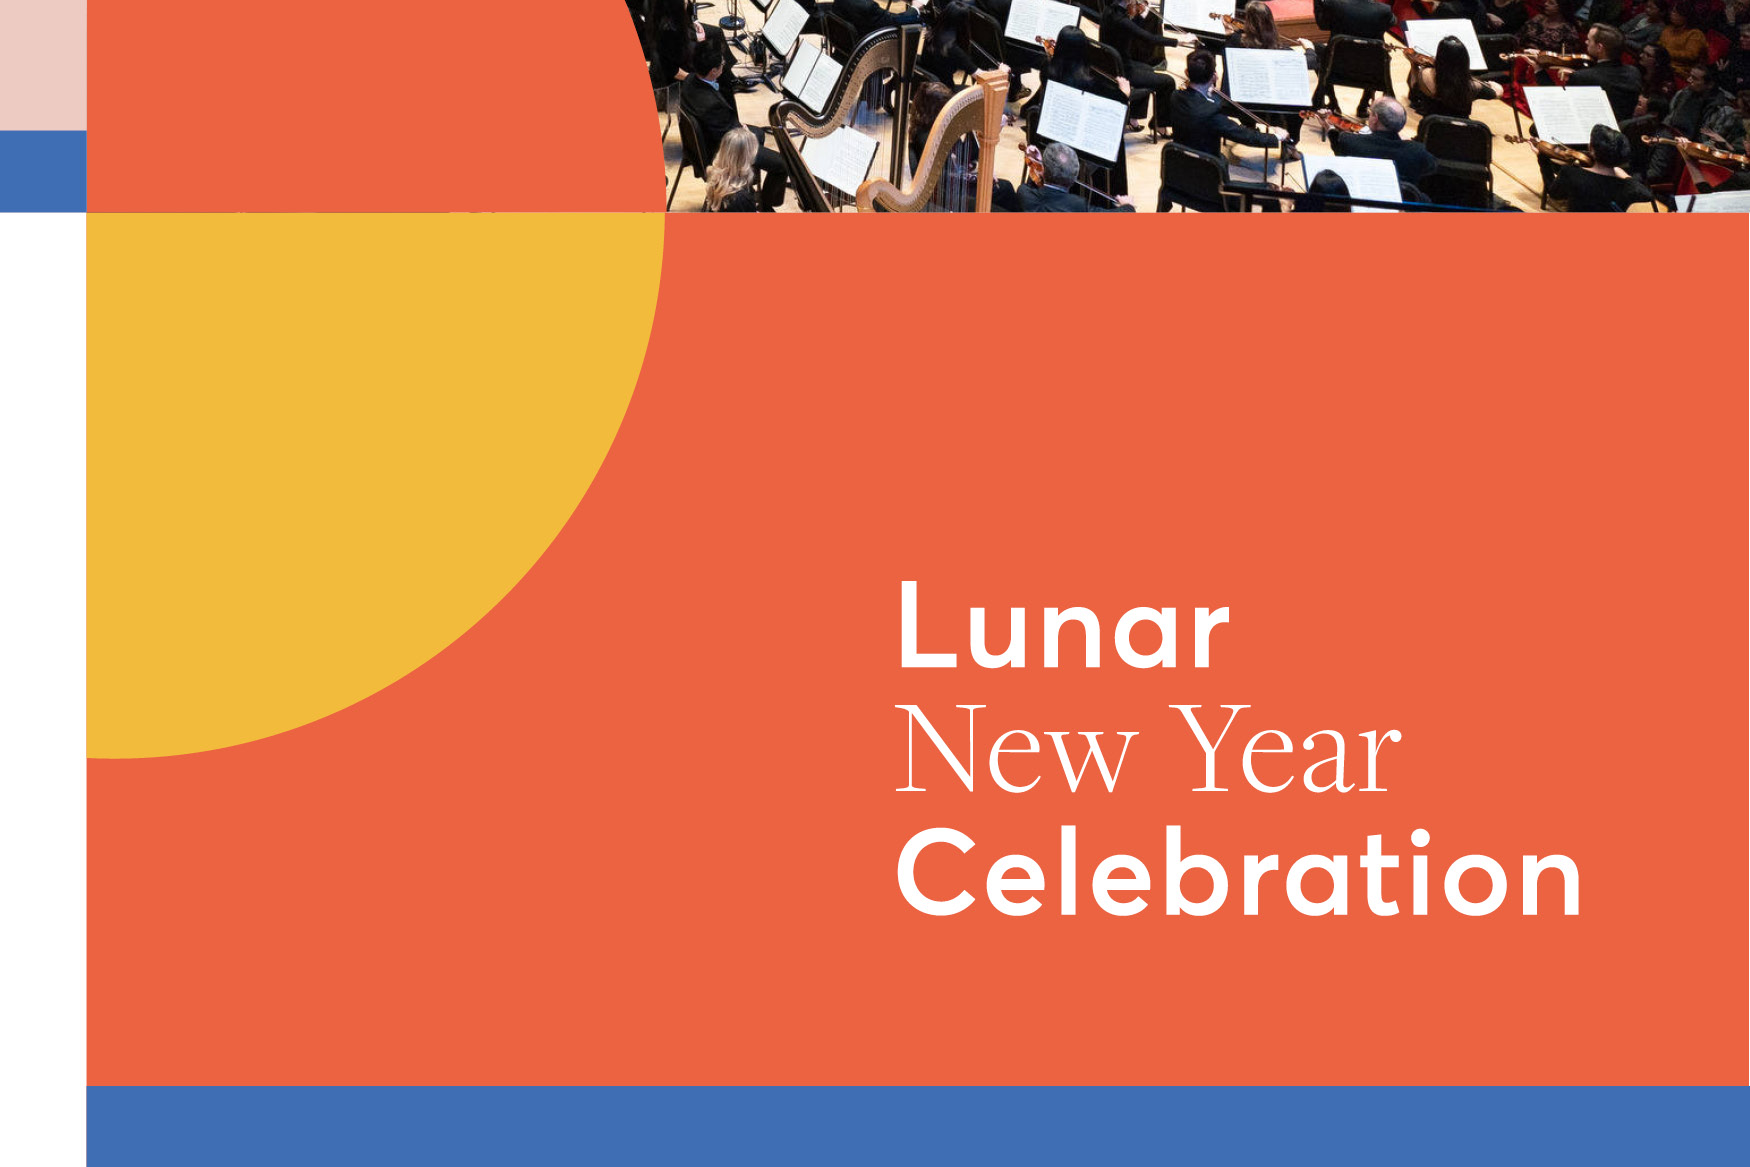 Lunar New Year Concert graphic